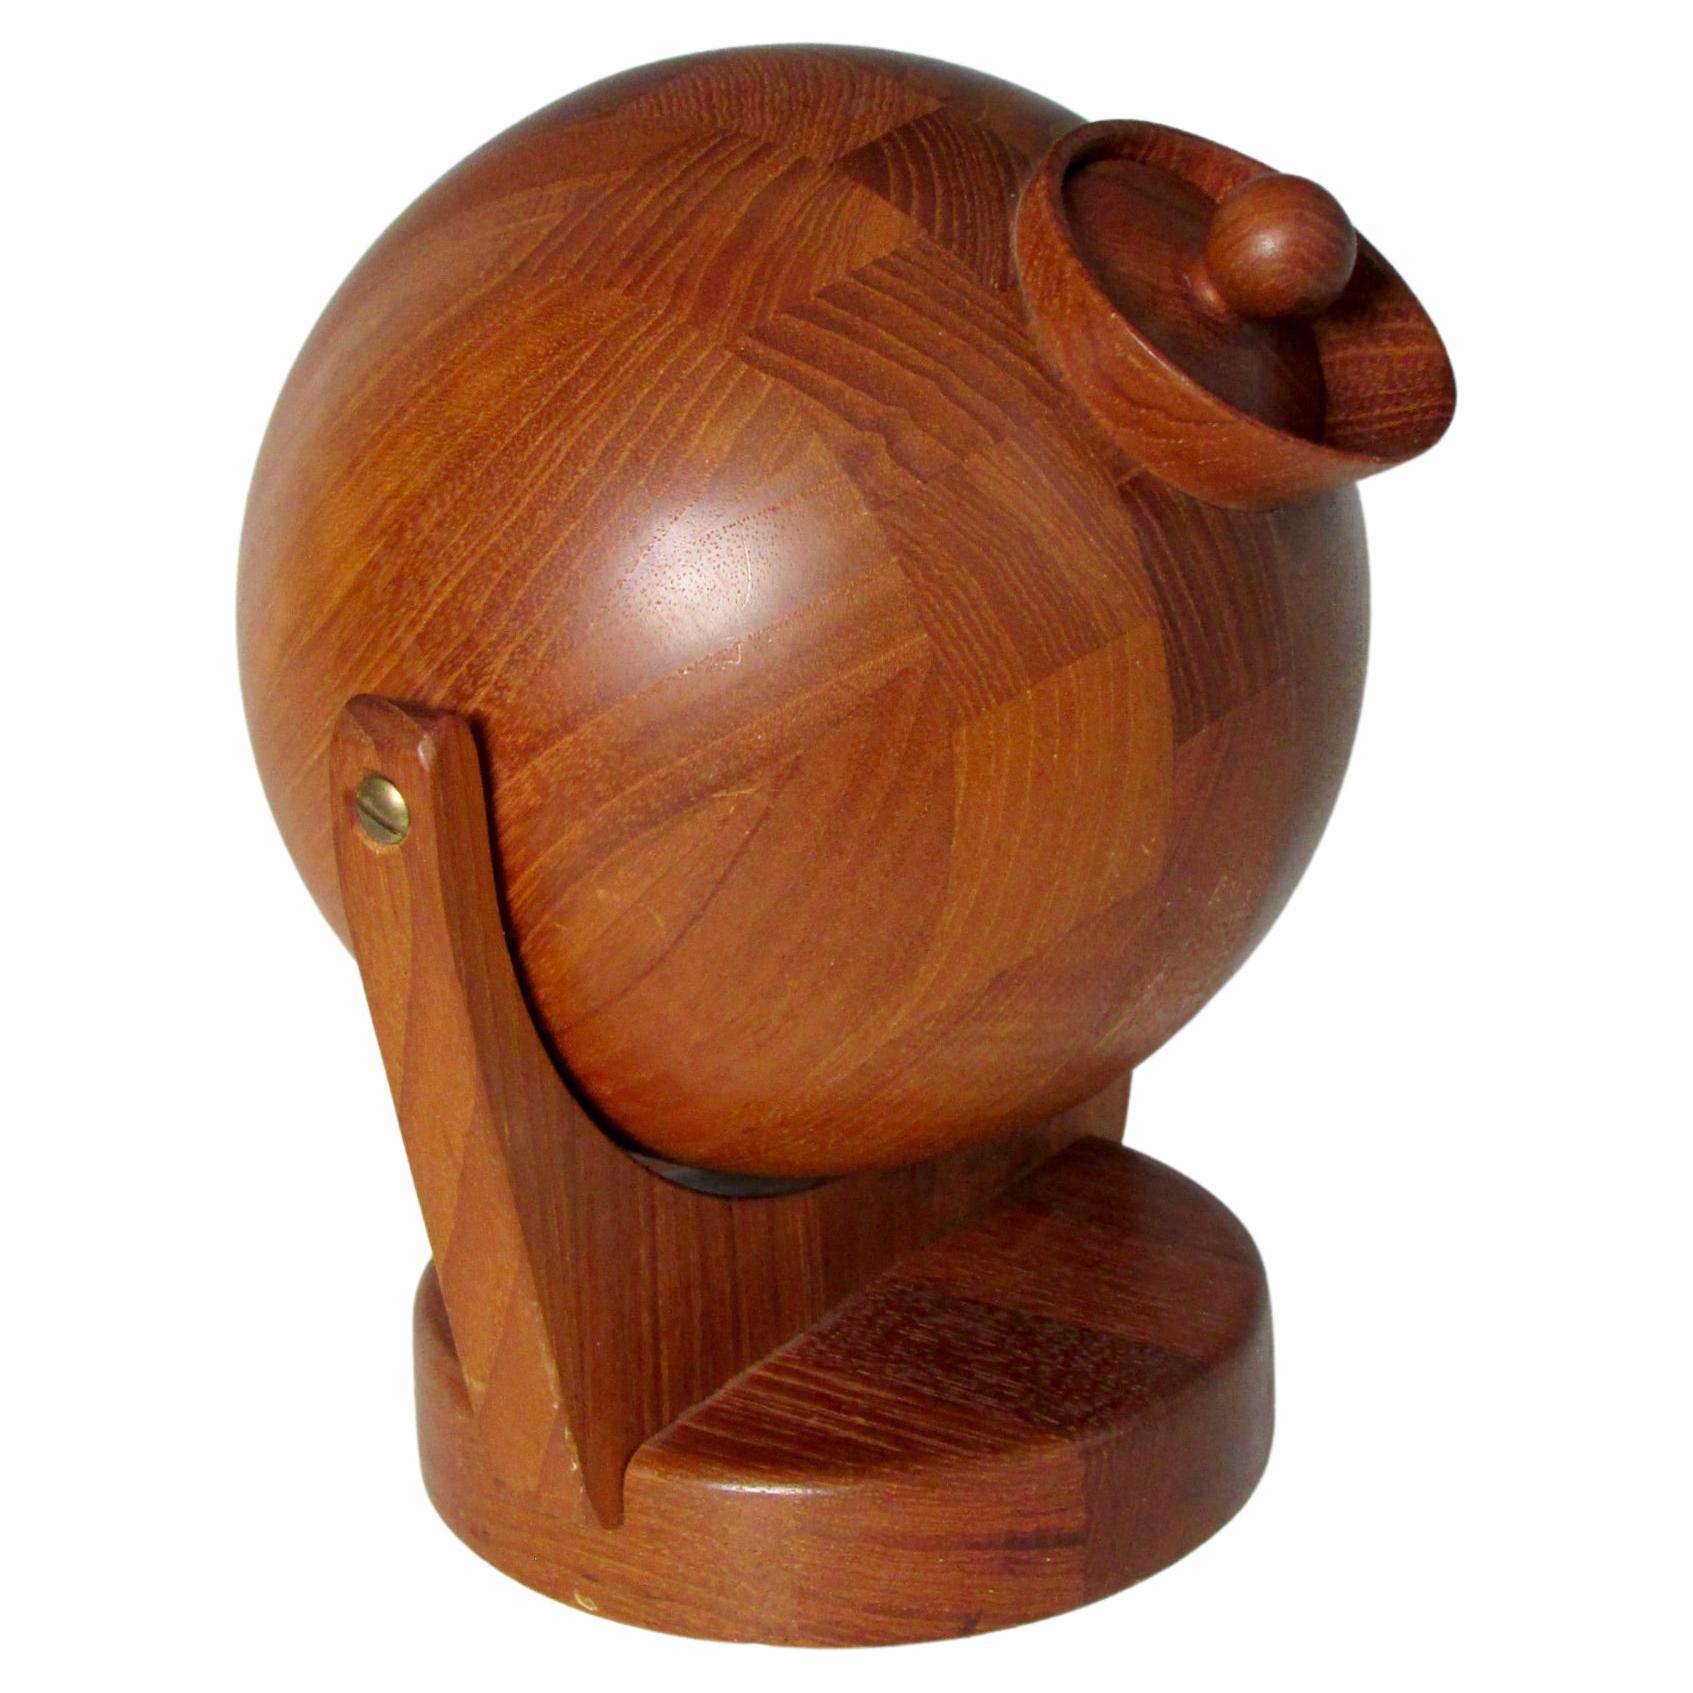 Rarely seen wall mounted teak salt ball. Wood base hooks to wall lathe turned teak wood ball swivels to pour or scoop out salt. Marked ESA Denmark.